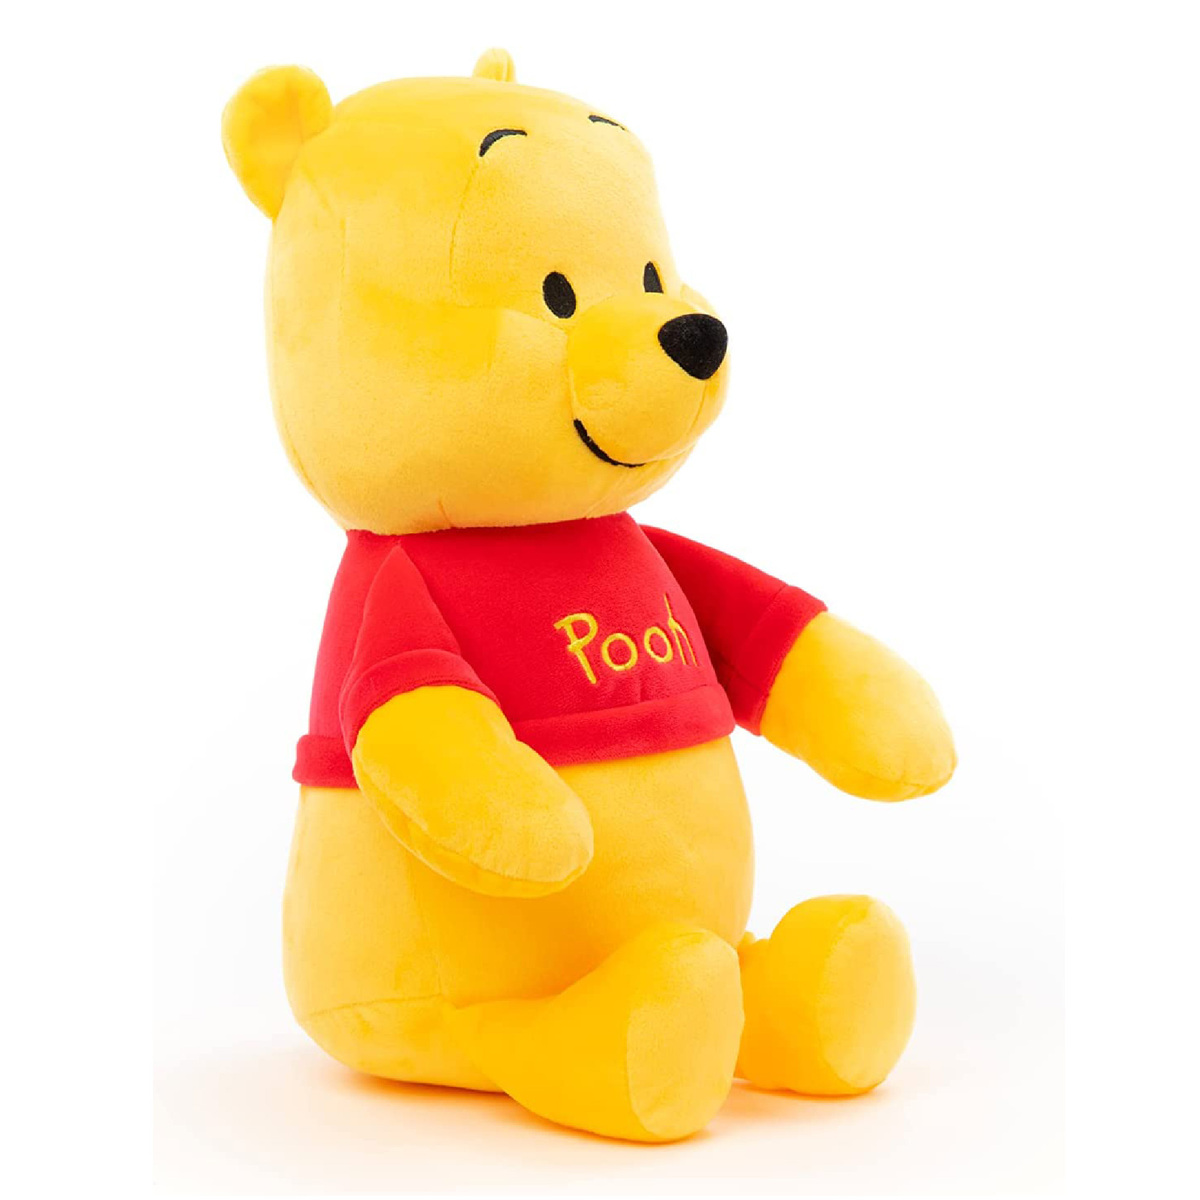 Disney Pooh Classic Plush Toy 15 inches, AG2102318